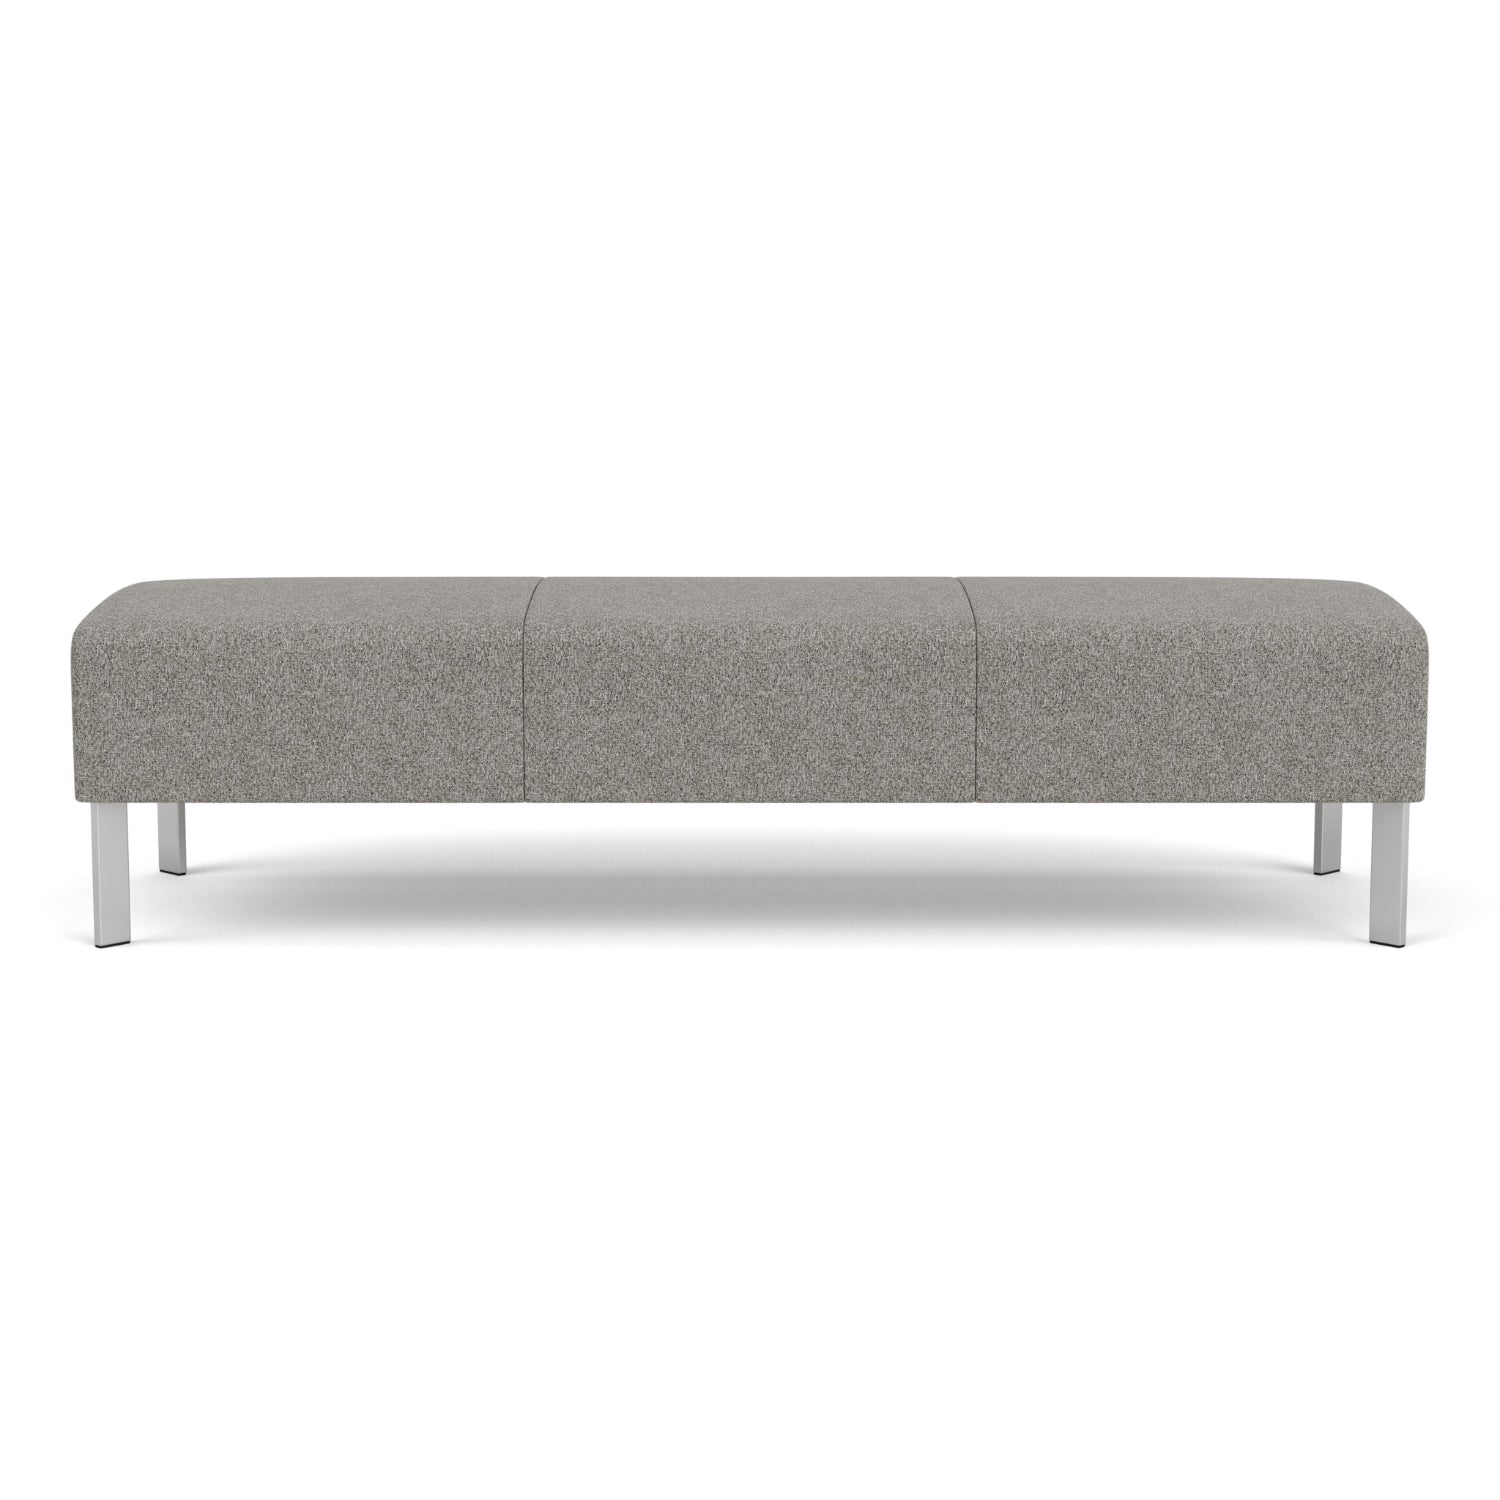 Luxe Collection Reception Seating, 3 Seat Bench, Standard Fabric Upholstery, FREE SHIPPING